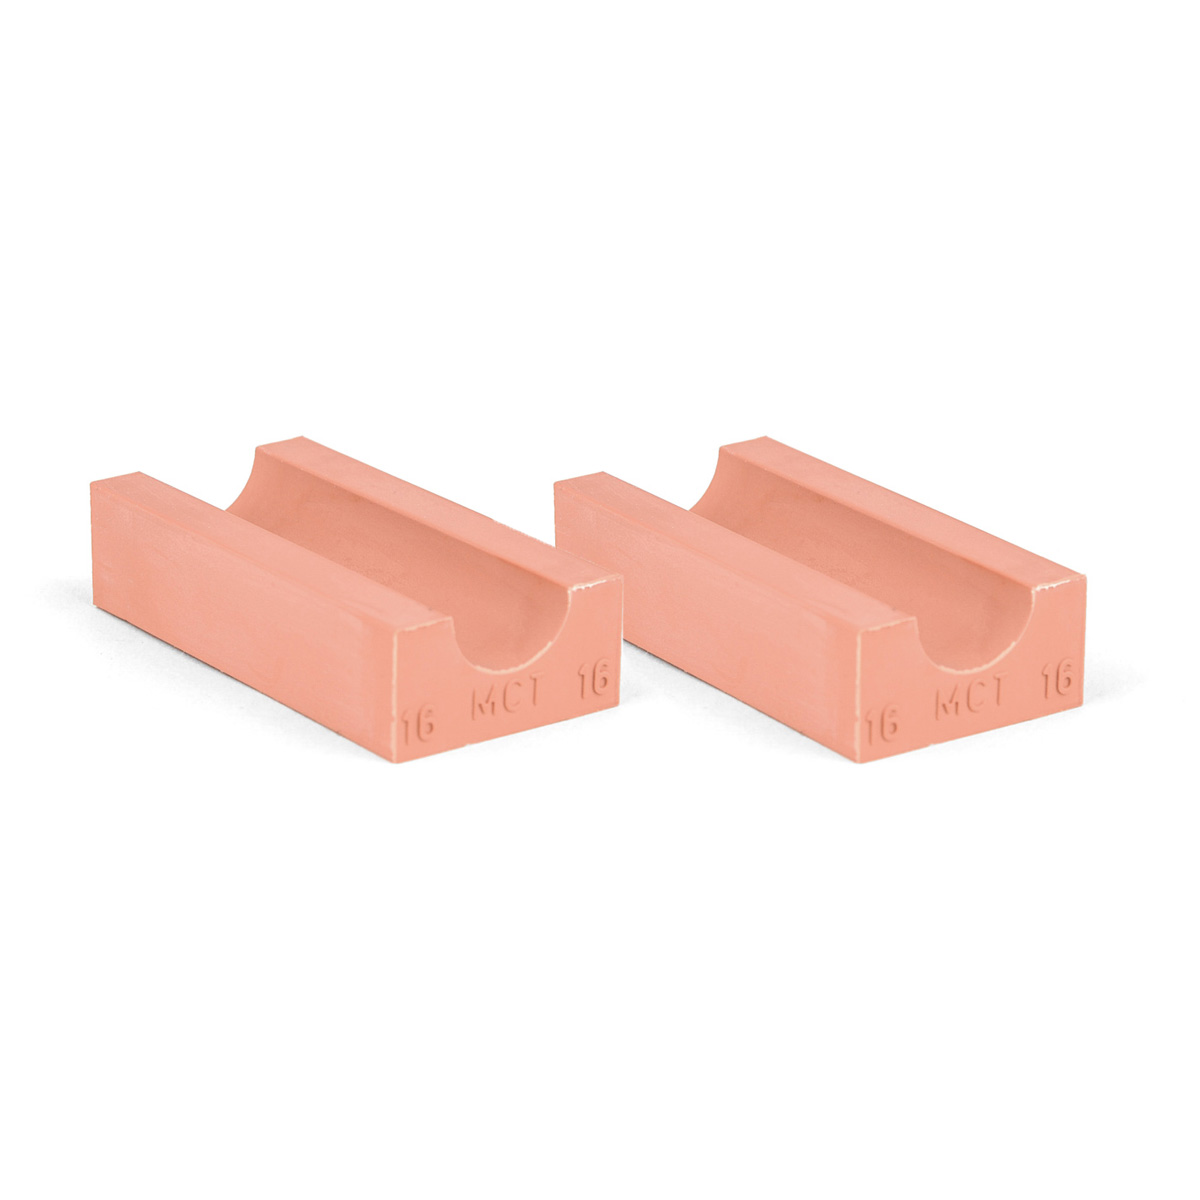 30-16*2 Set of 2 half insert block lycron, 30-16 for cable/pipe diam. 15.5-16.5mm